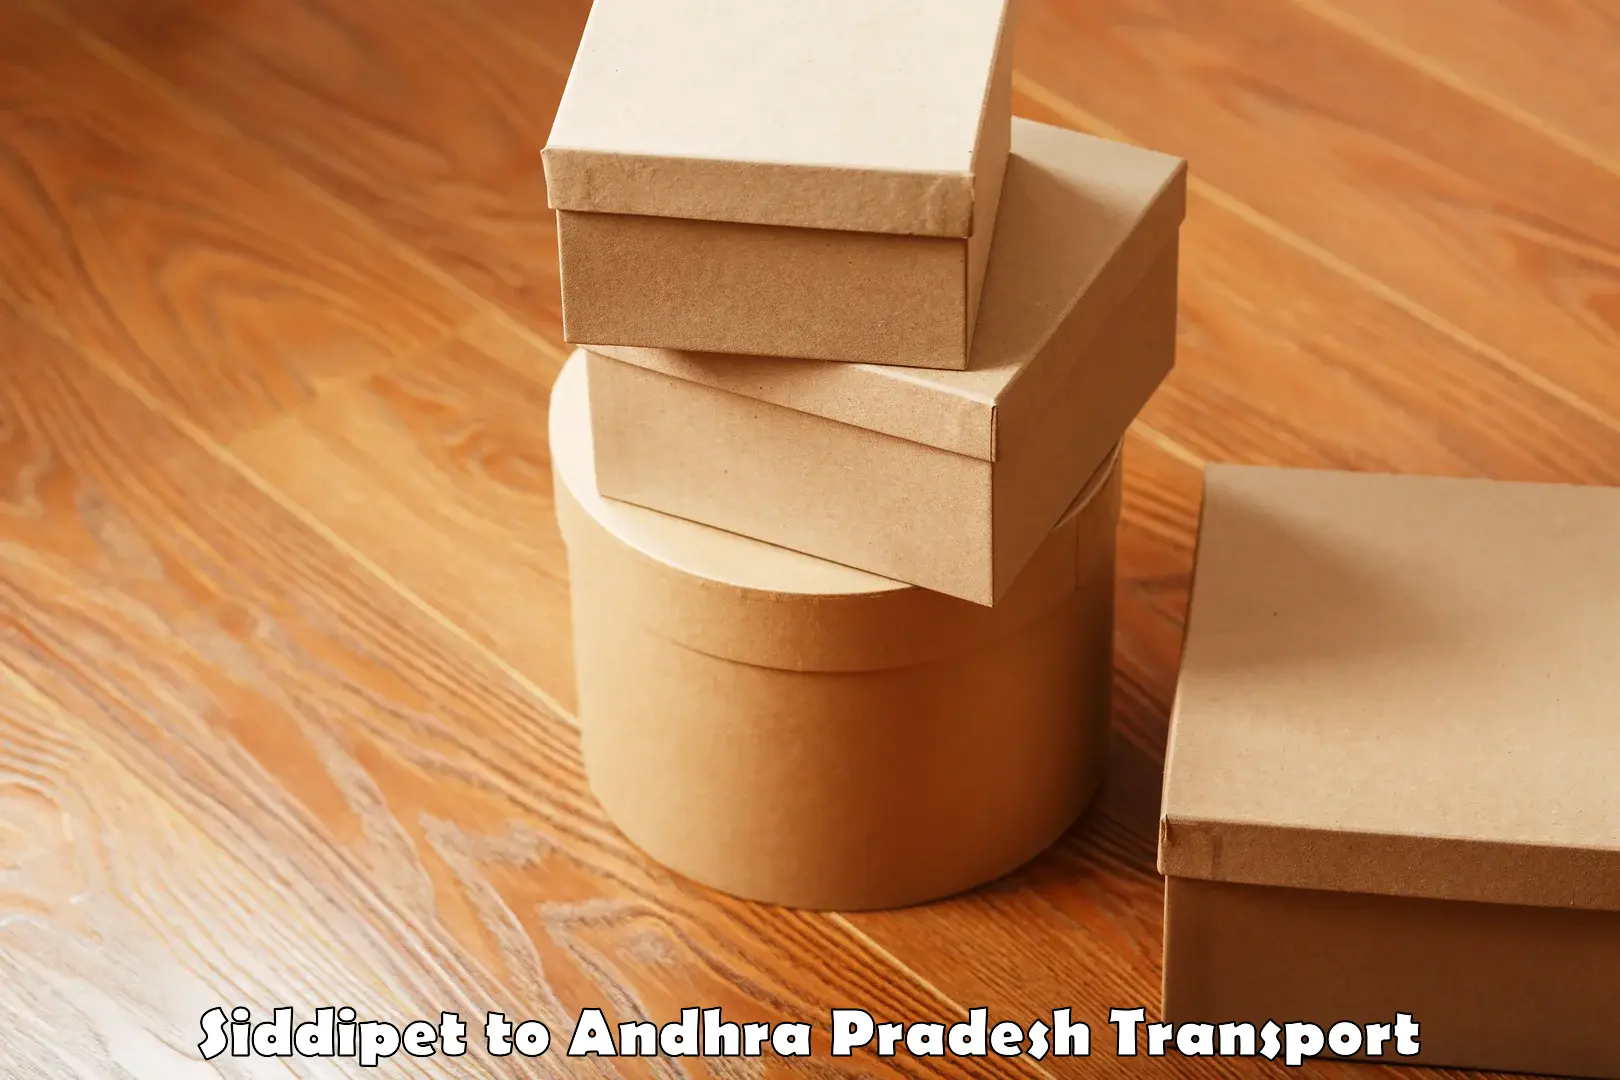 Part load transport service in India Siddipet to Andhra Pradesh